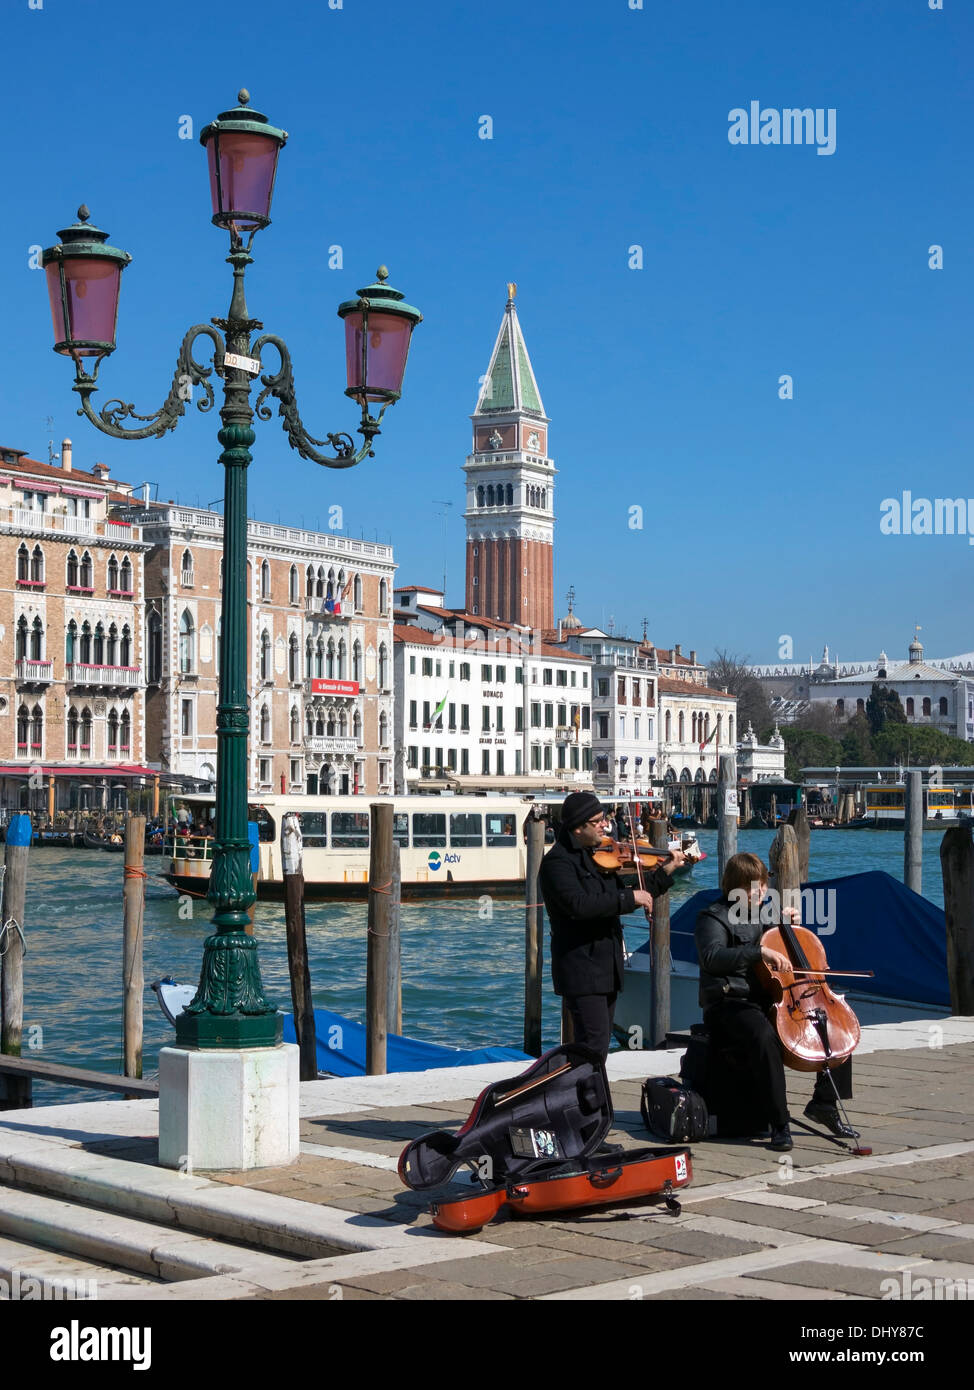 Grand Canal, buskers, ornate street lamp, Campanile Tower, Salute, Venice, Italy. Stock Photo